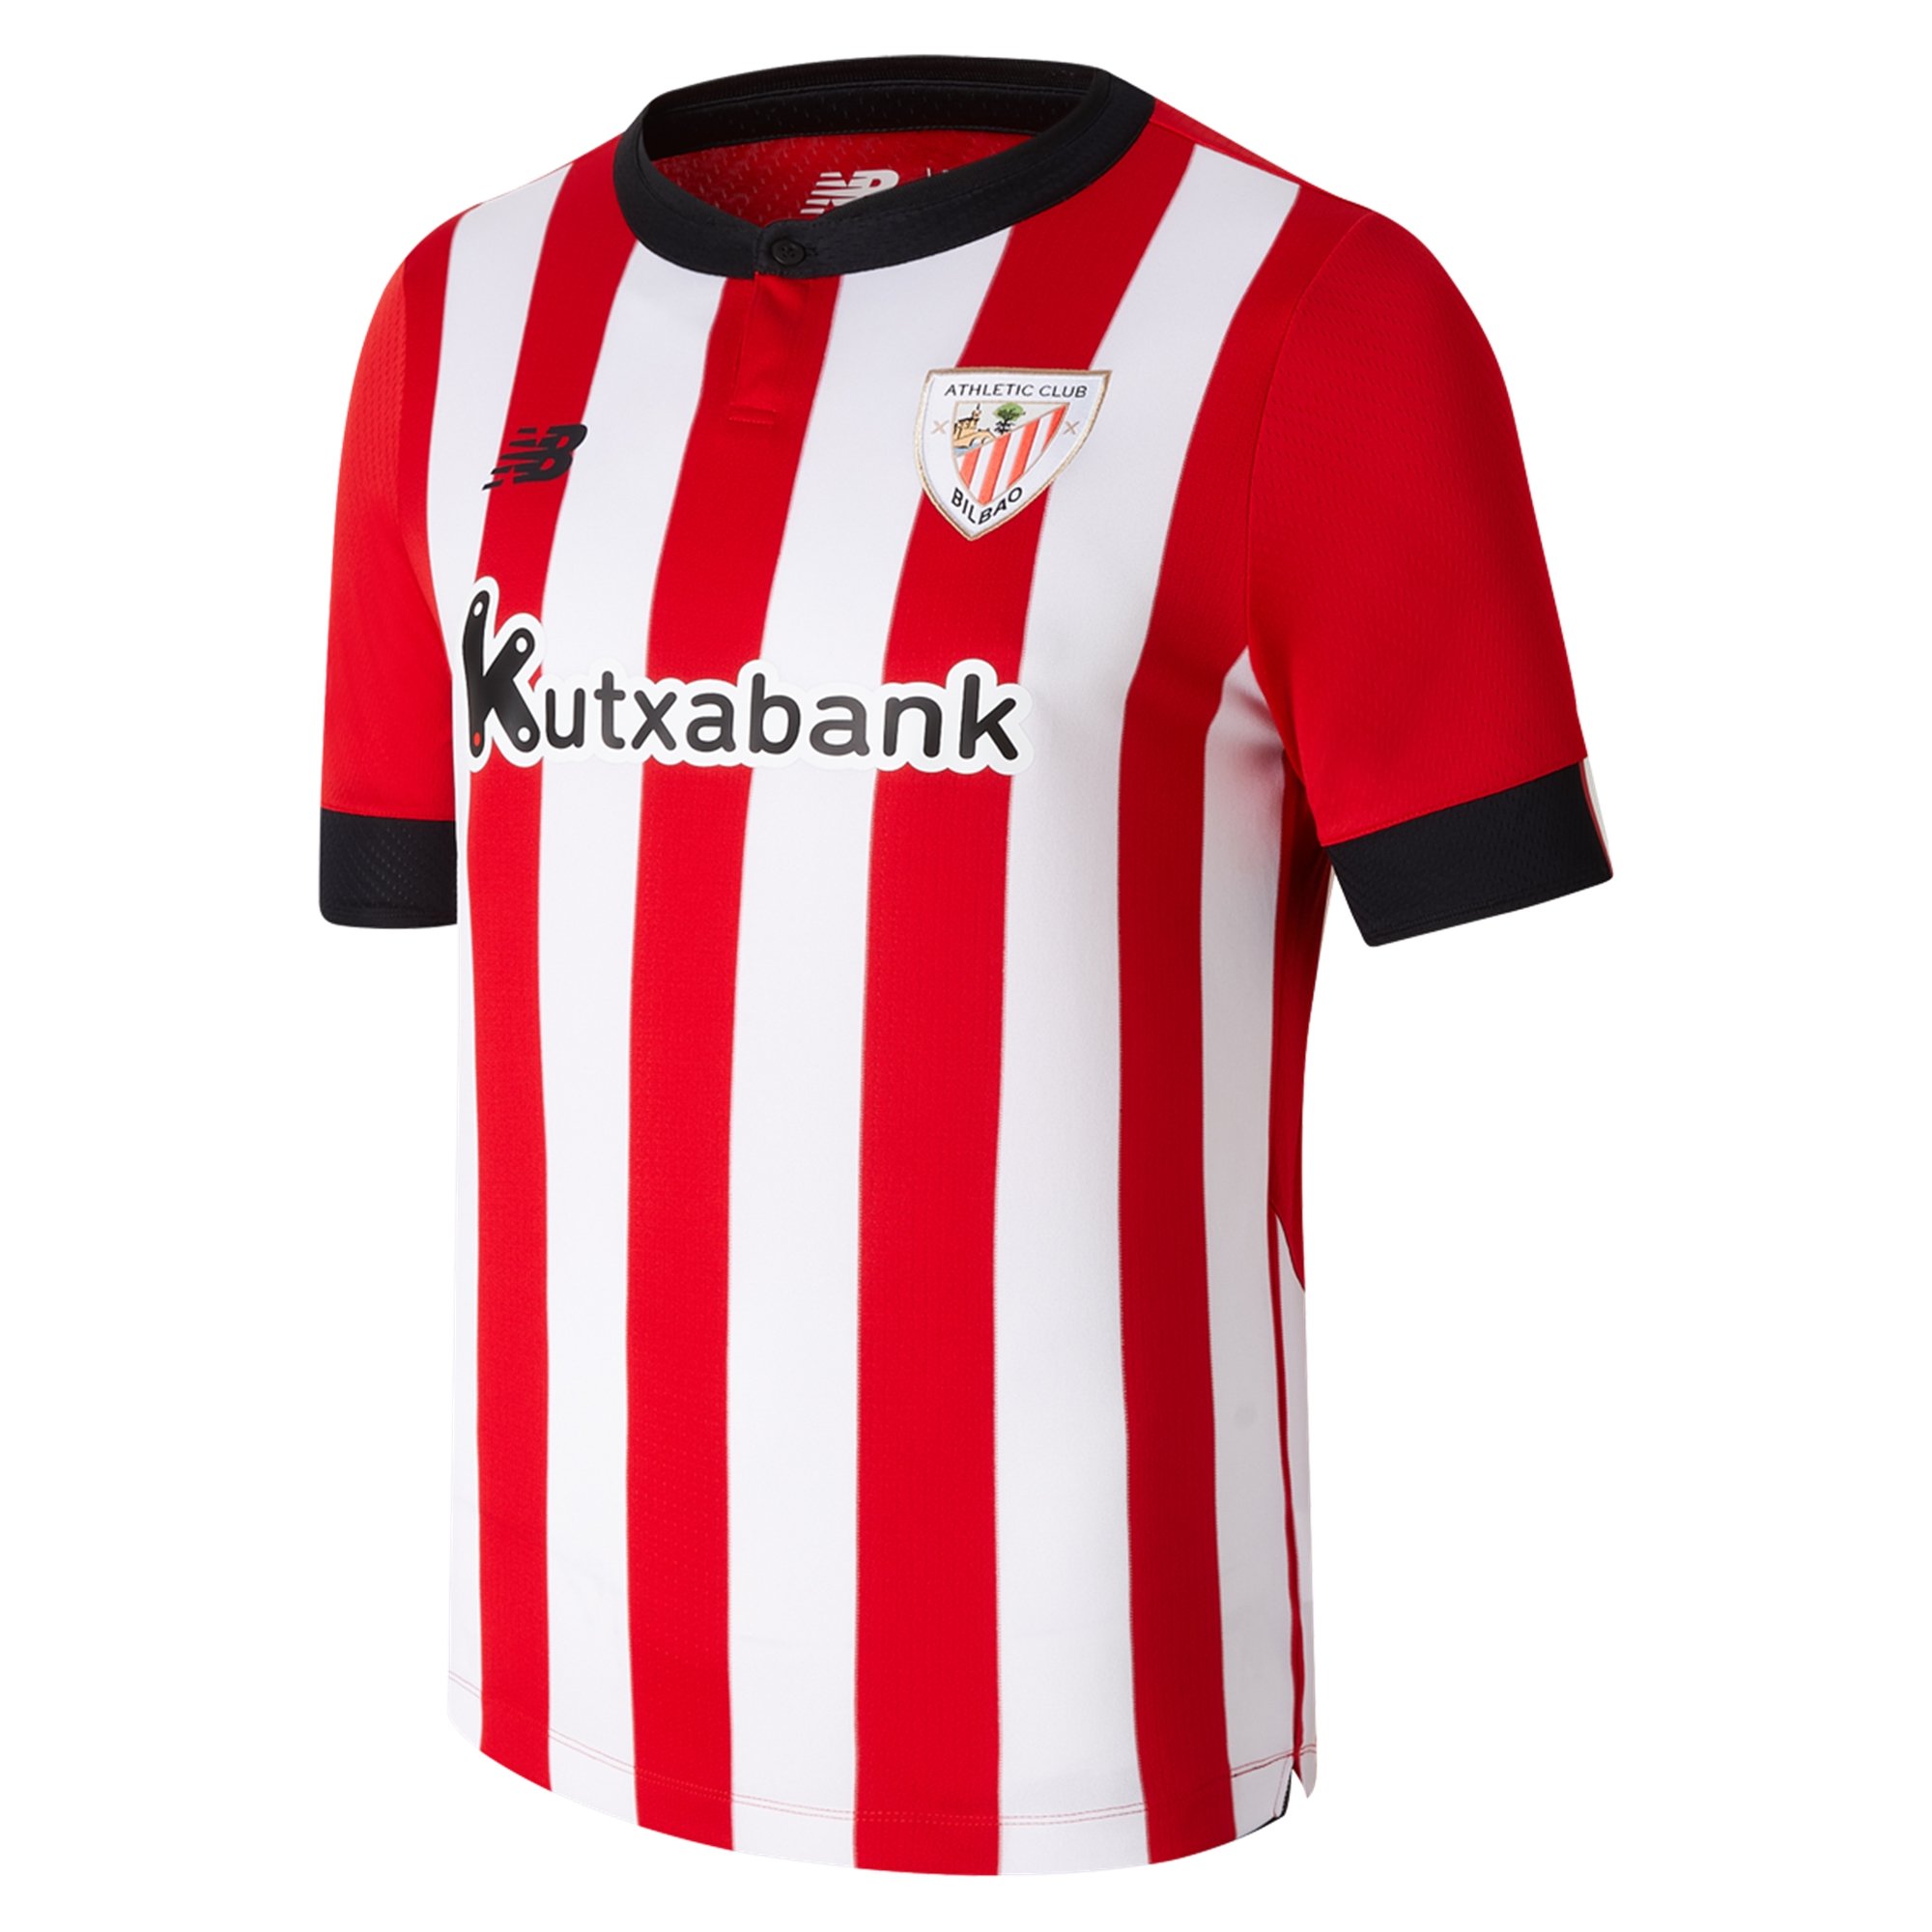 Athletic Club - Athletic Club's Official Website, athletic bilbao